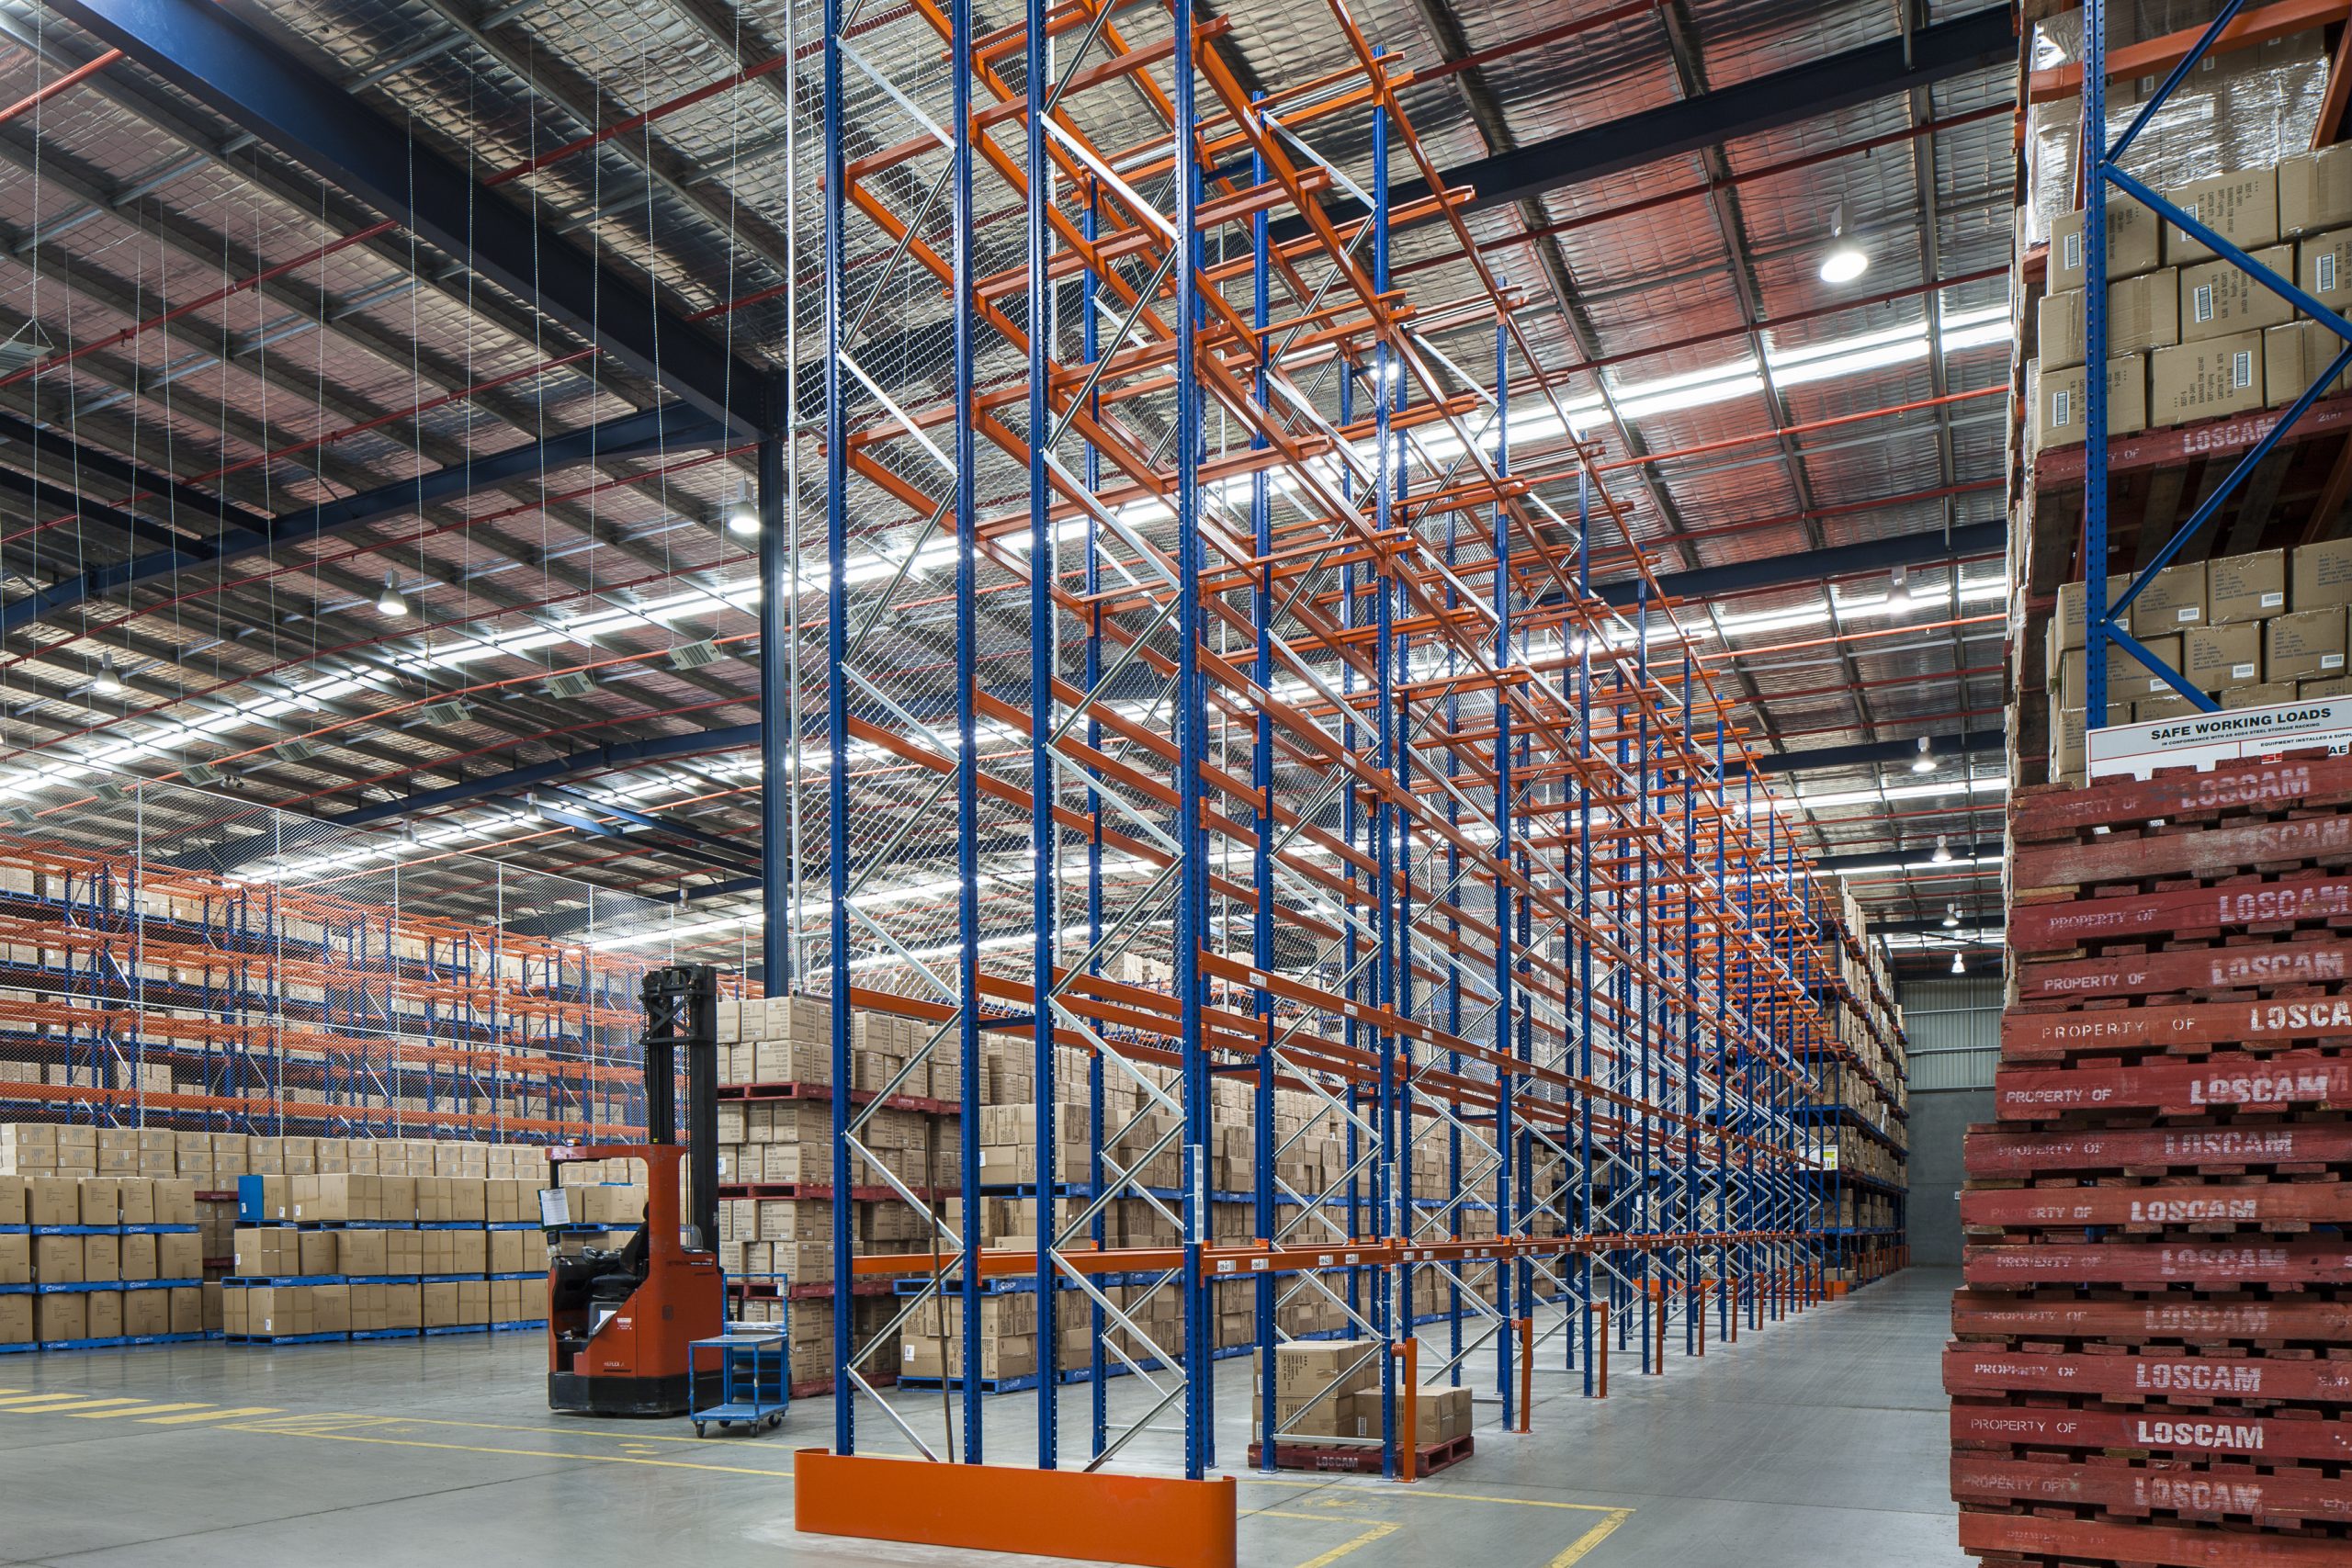 Frame height and depth, pallet racking dimensions